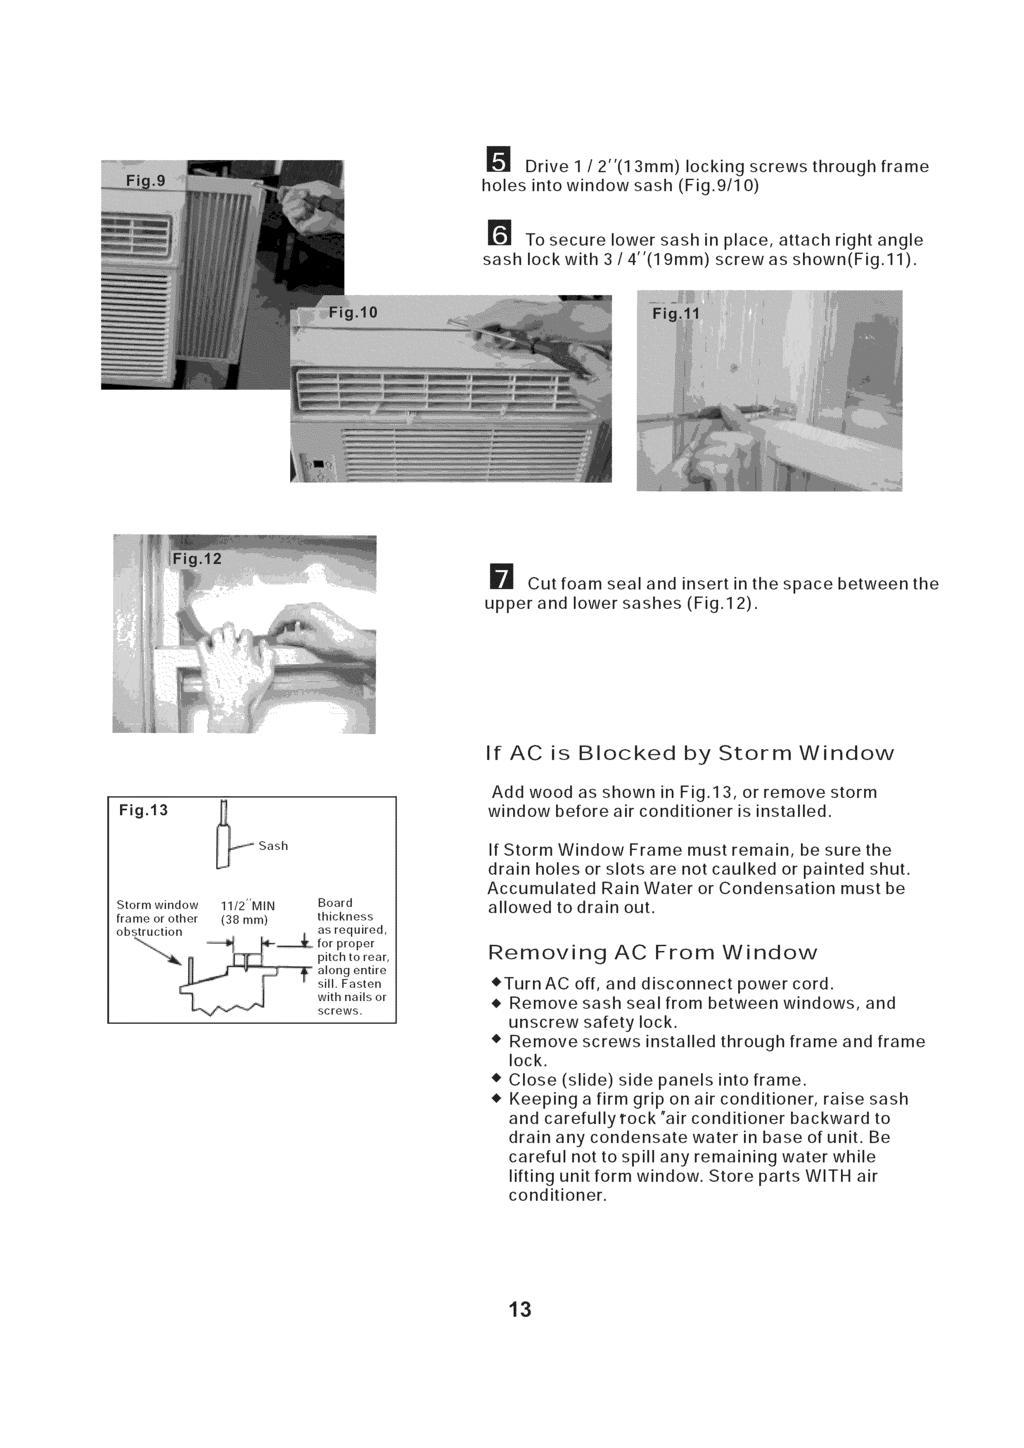 Drive 1 / 2"(13mm) locking screws through frame holes into window sash (Fig.9/1 0) _'_ To secure lower sash in place, attach right angle sash lock with 3 / 4"(19mm) screw as shown(fig.11).